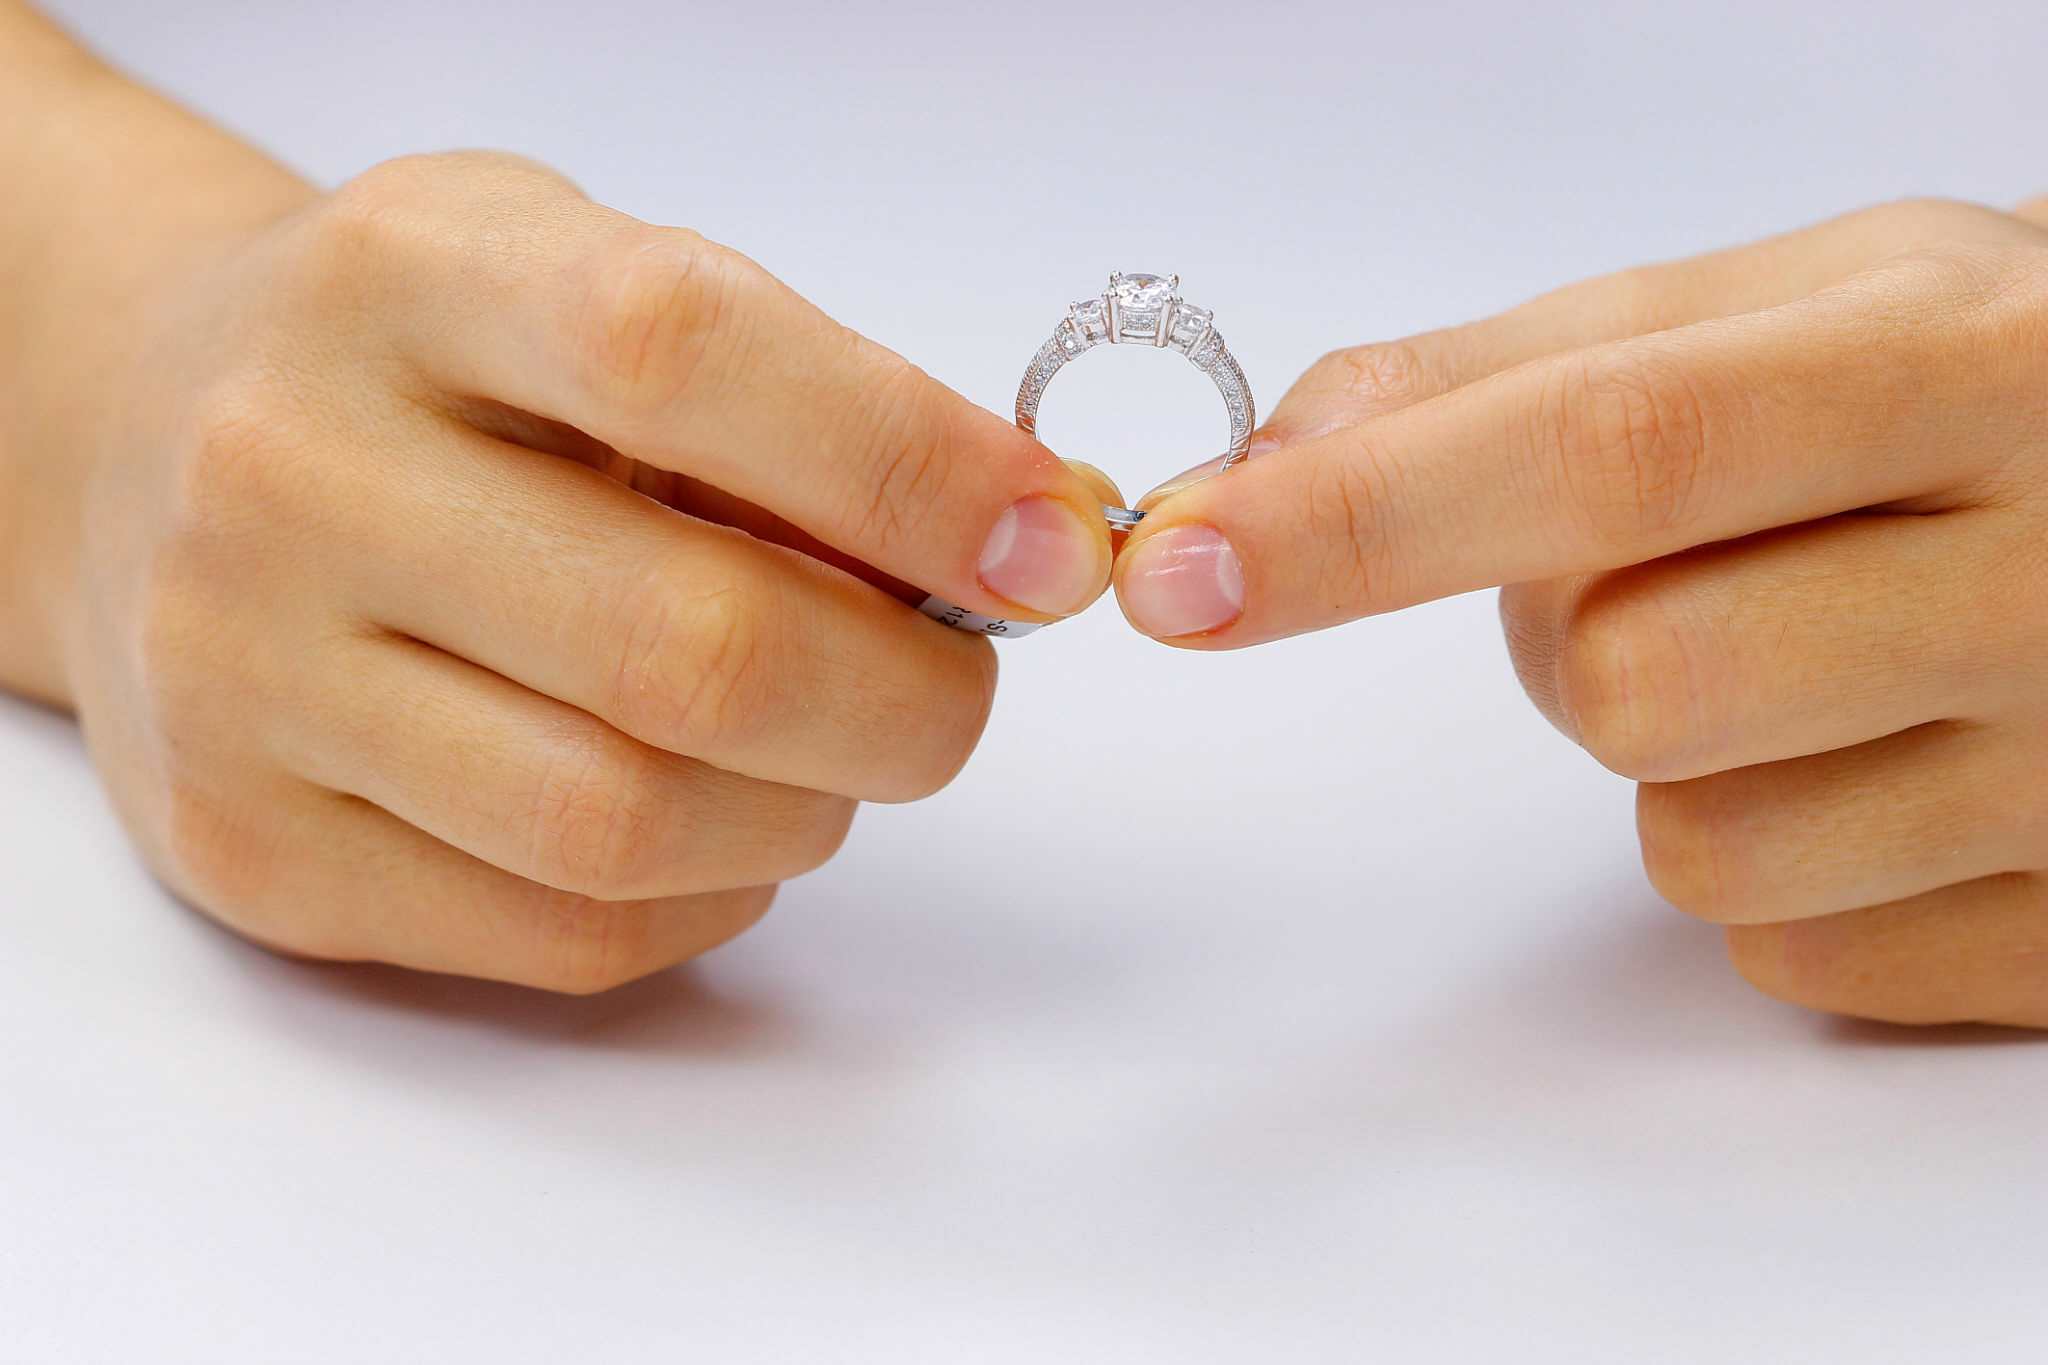 Selecting the perfect ring